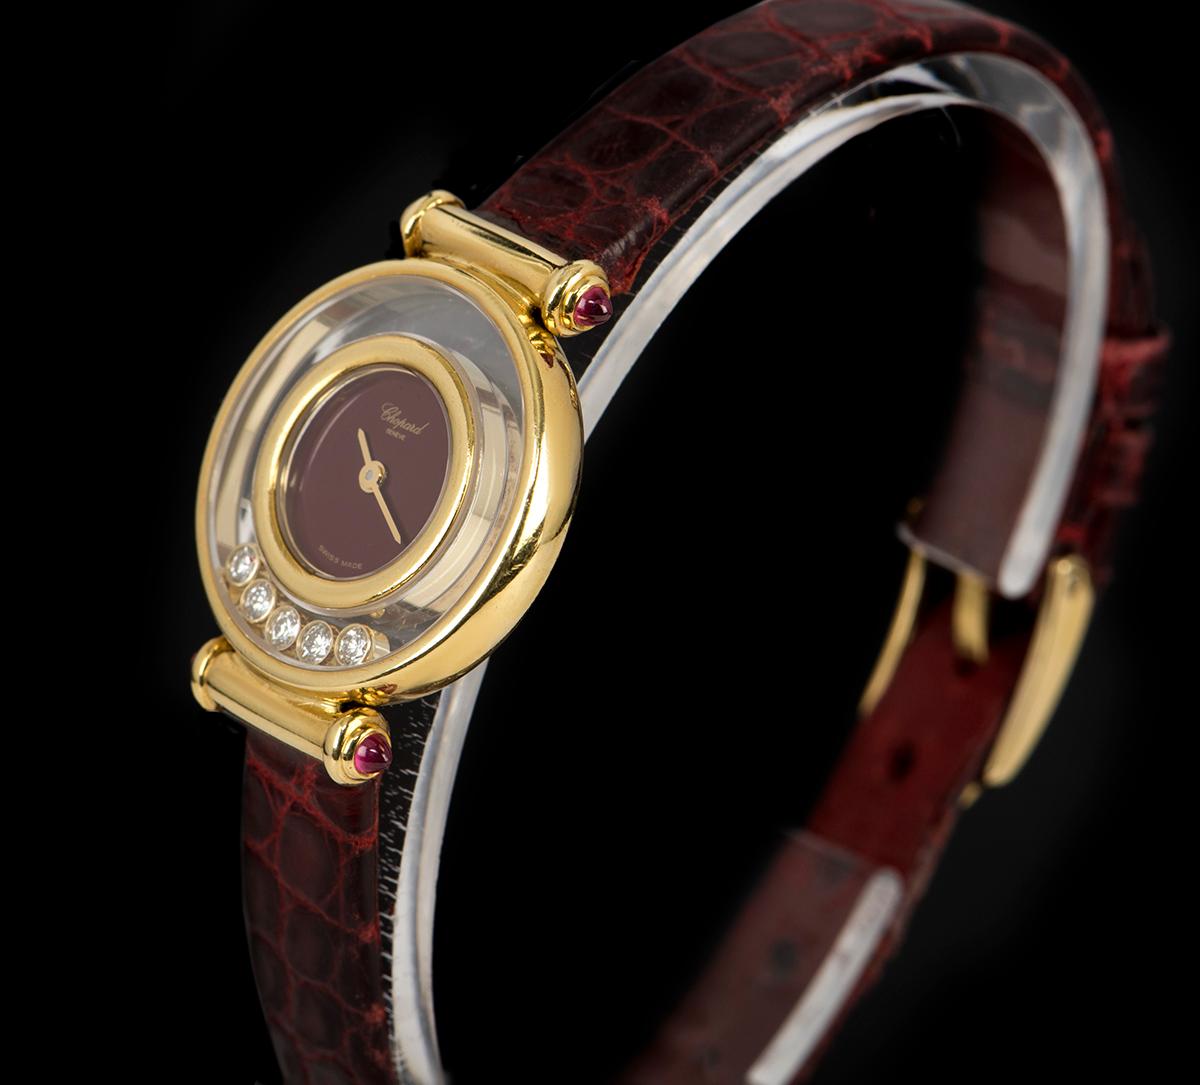 An 18k Yellow Gold Happy Diamonds Ladies Wristwatch, maroon dial, a fixed 18k yellow gold inner bezel, a fixed 18k yellow gold outer bezel, 5 round brilliant floating diamonds in between both bezels, a maroon leather strap (not by Chopard) with an